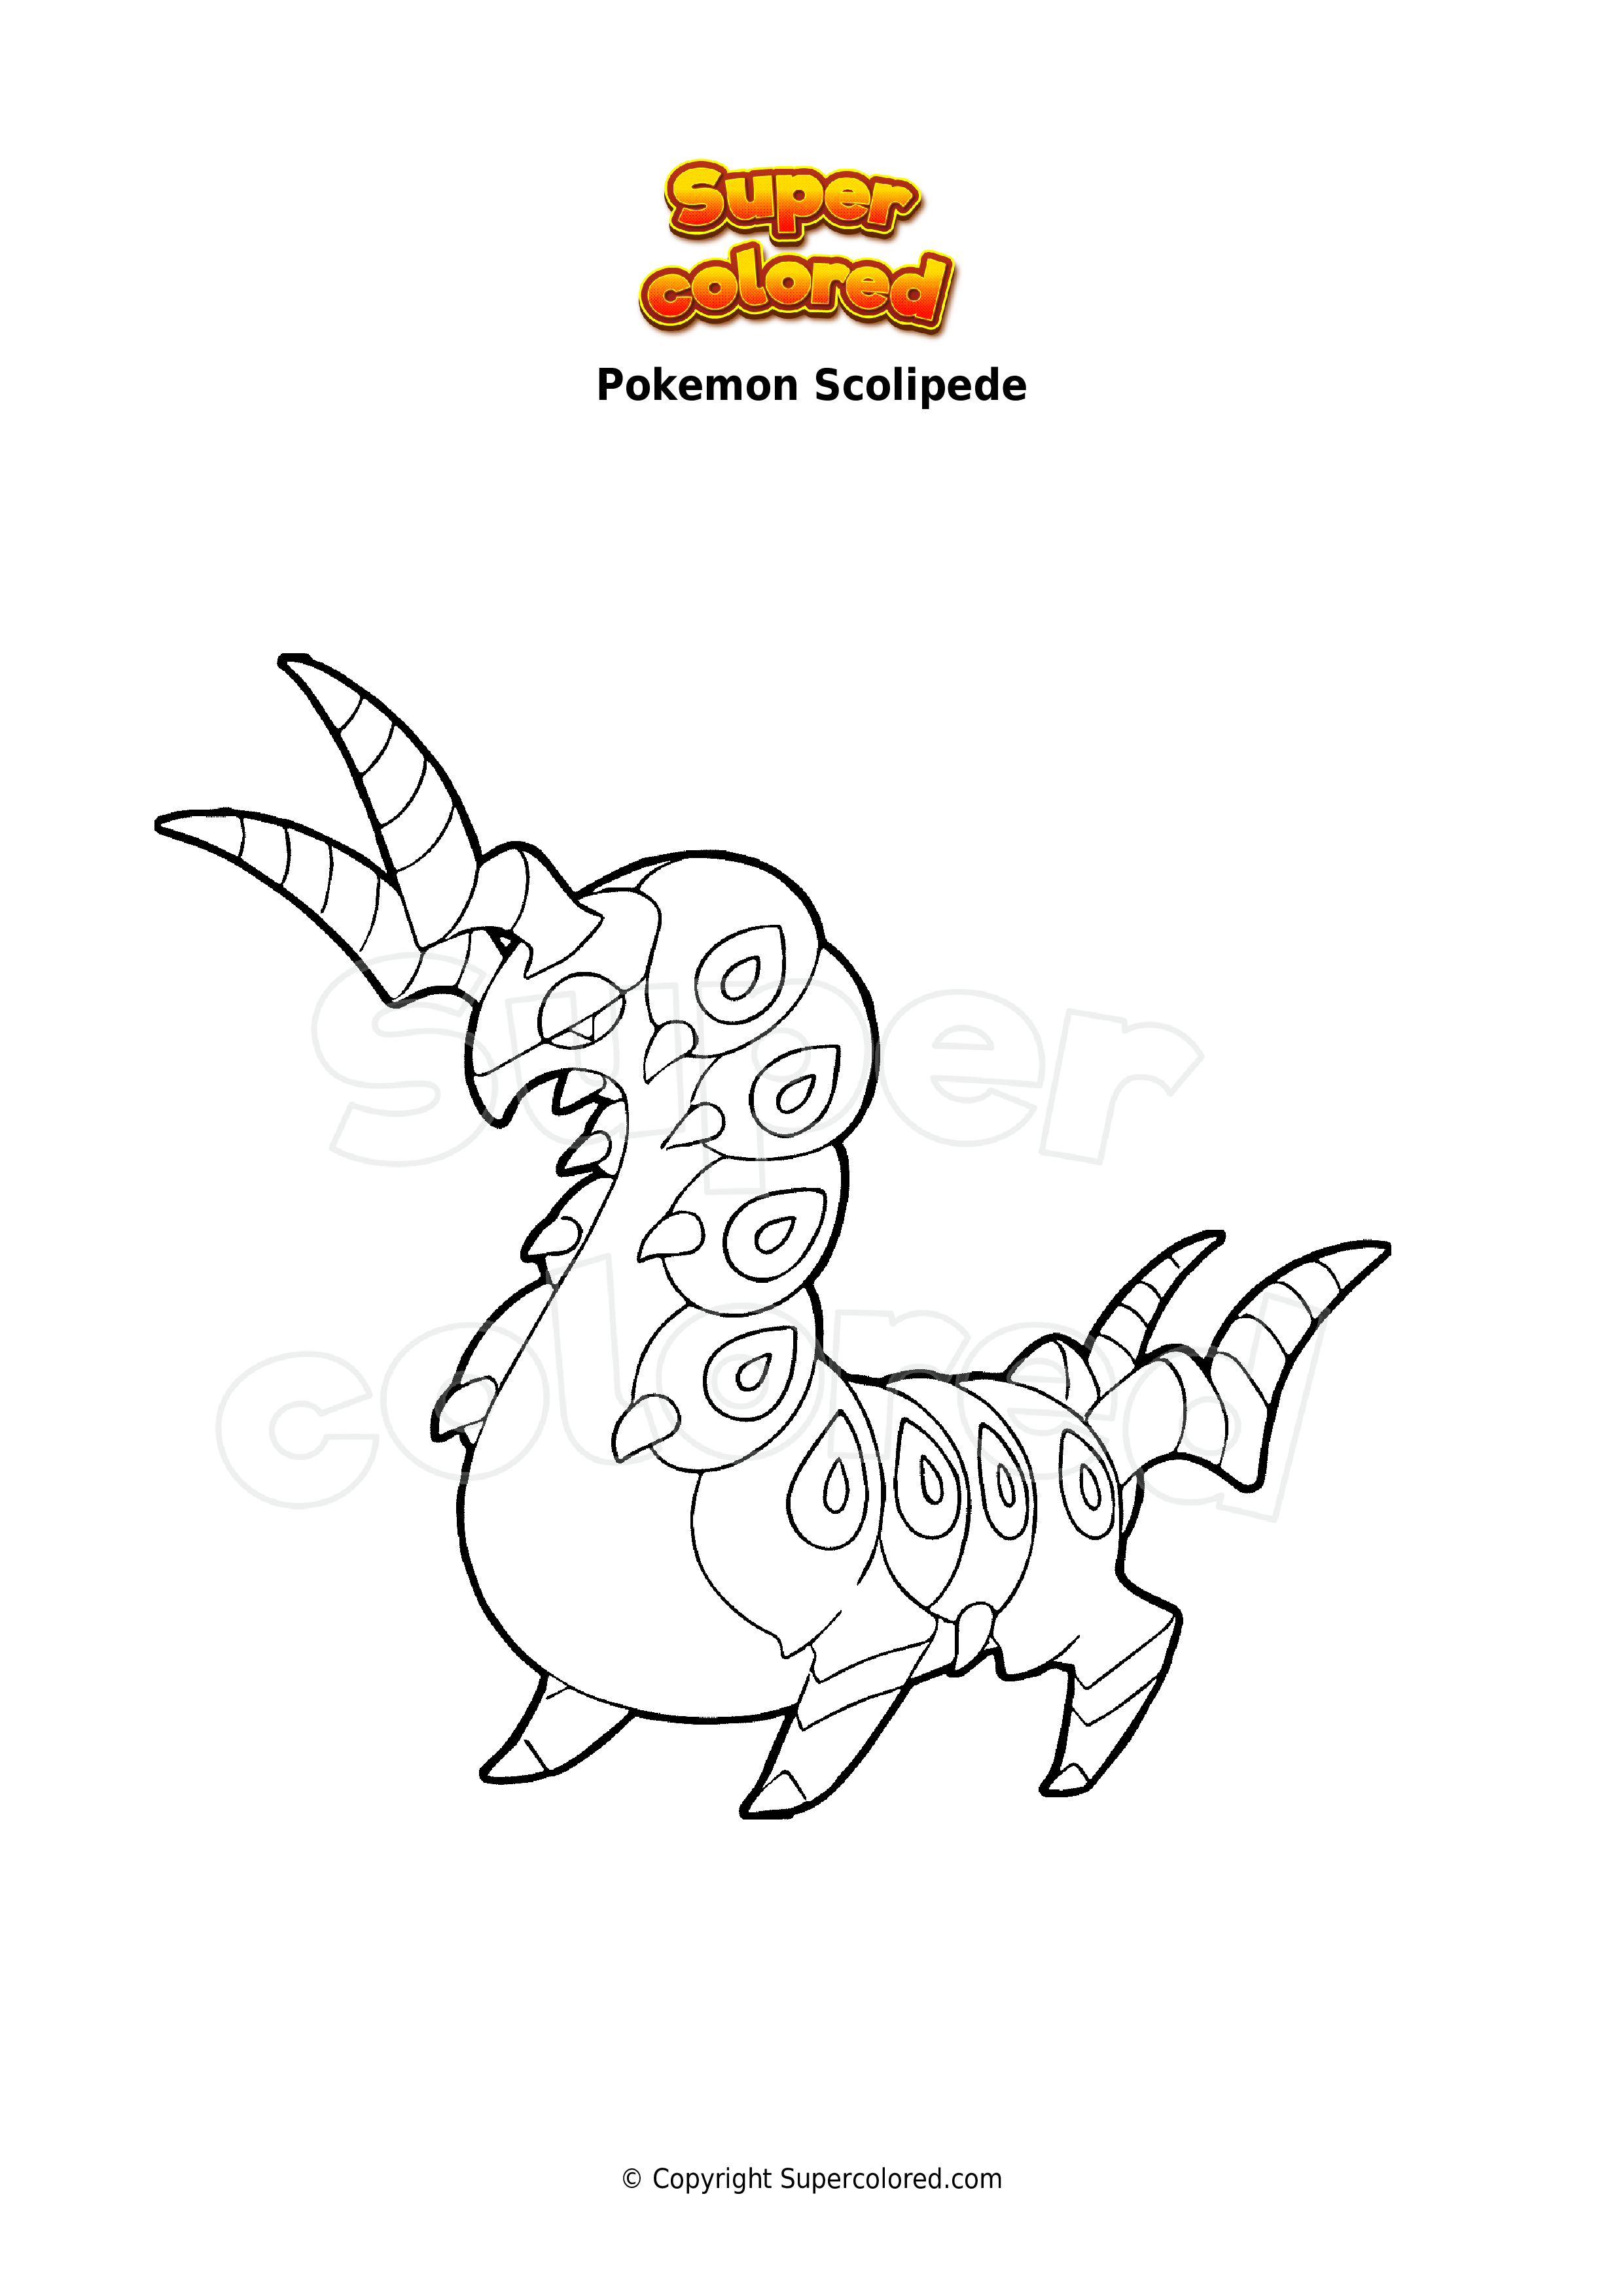 99 coloring pages of Pokemon